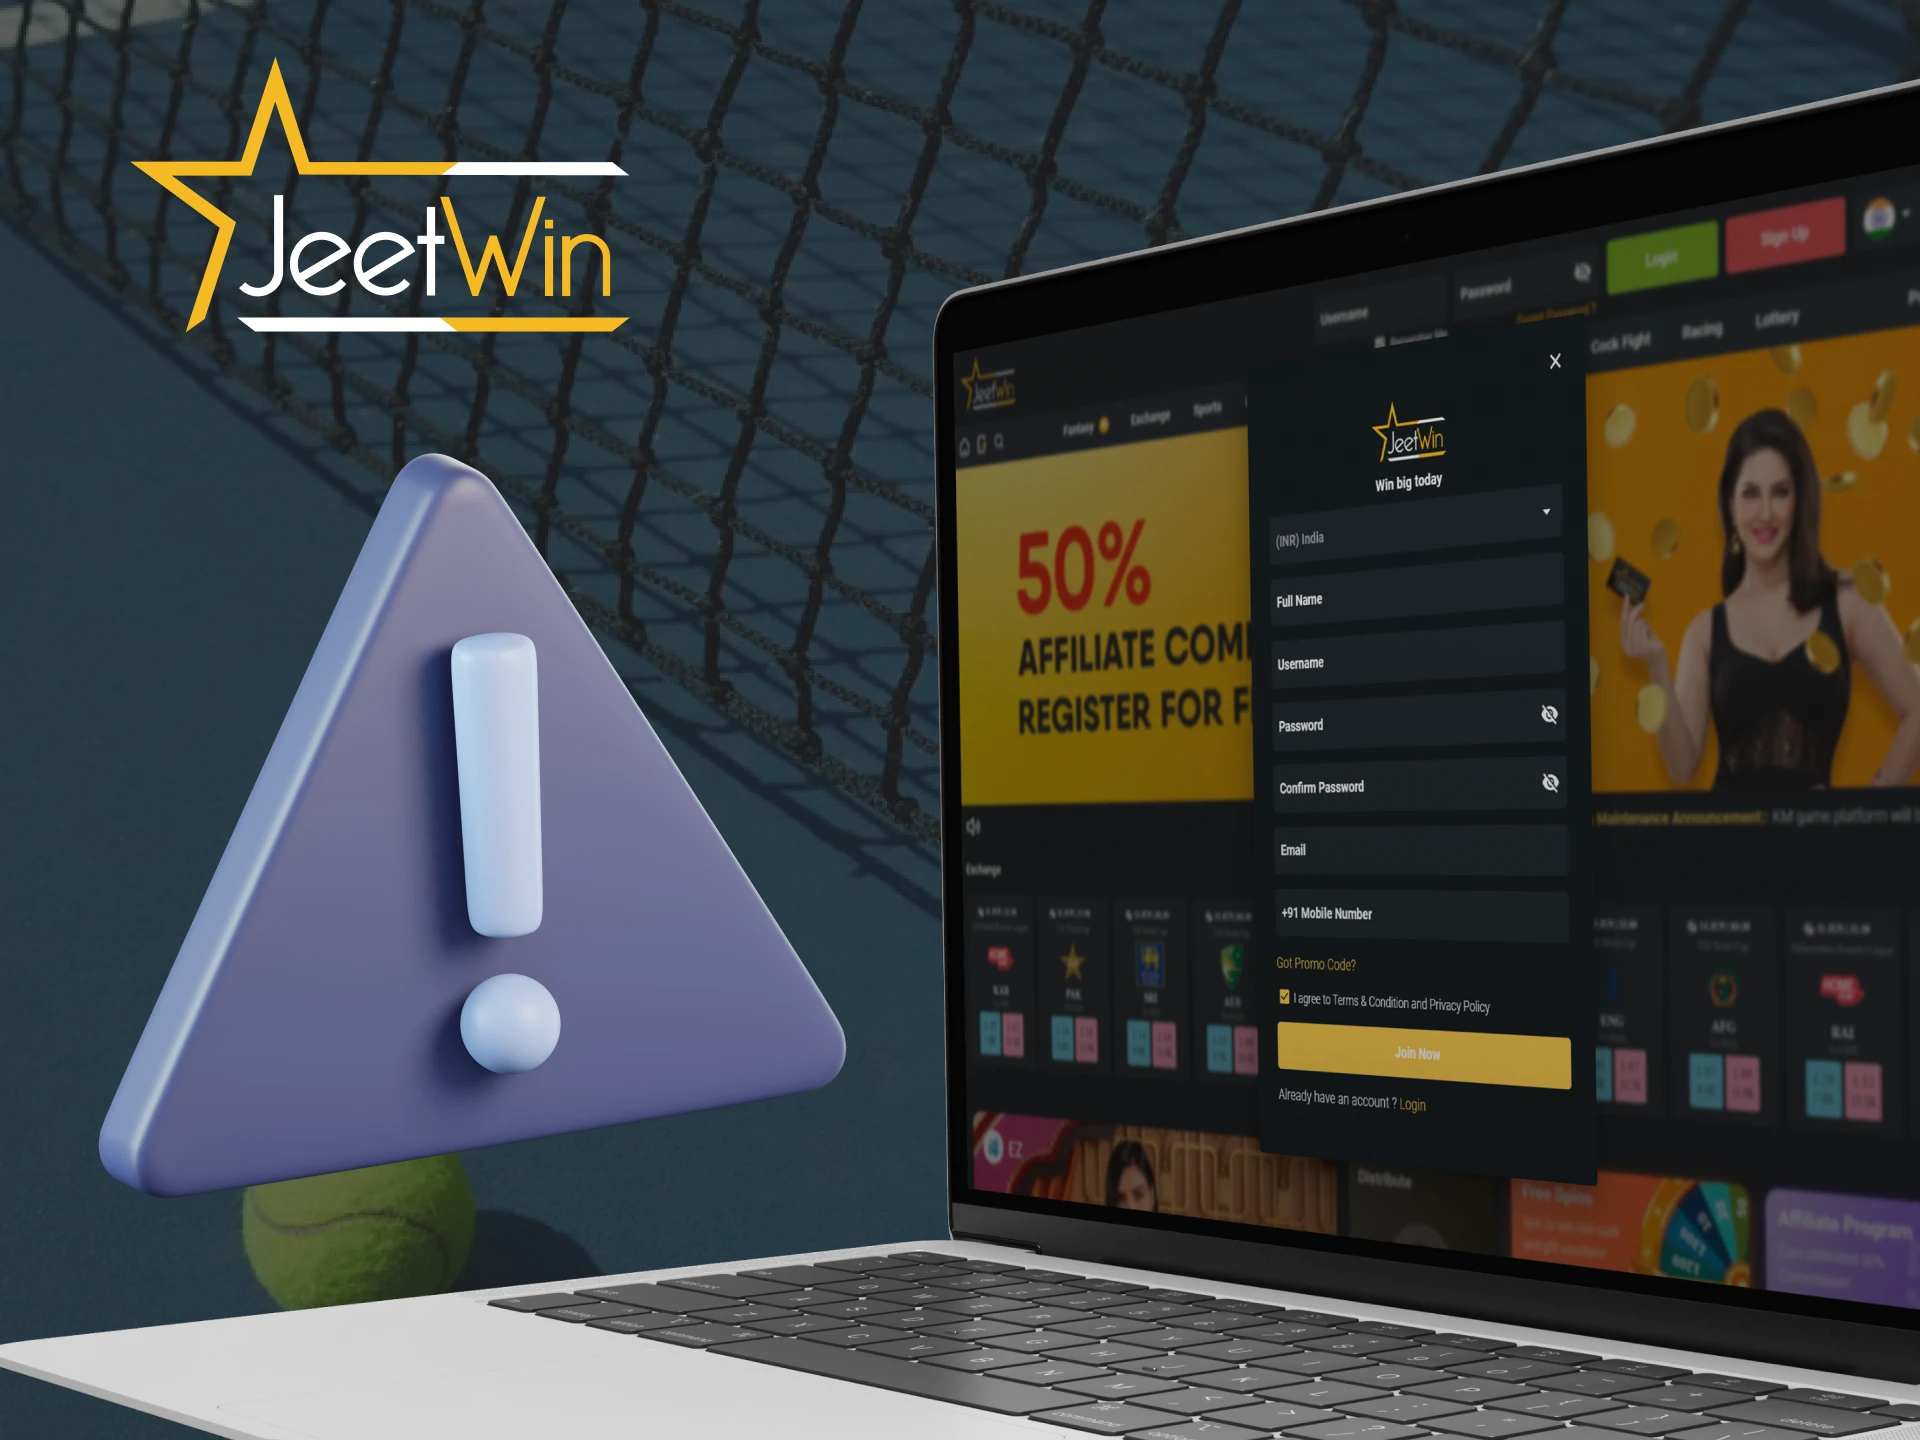 Here are all the major problems that you may face while registering with Jeetwin.